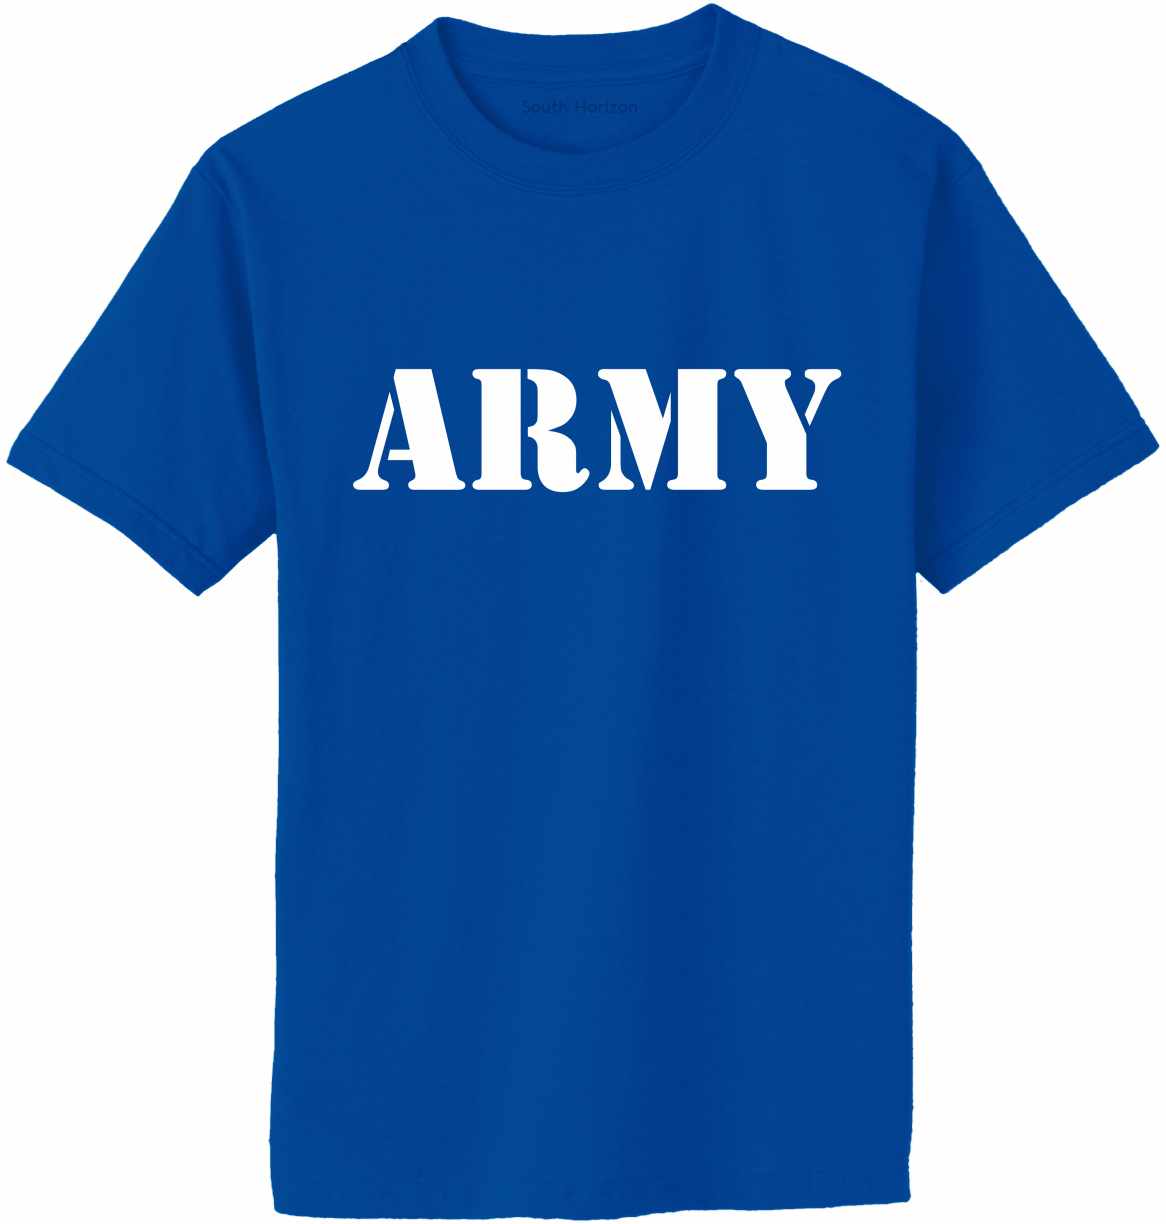 ARMY Adult T-Shirt (#338-1)